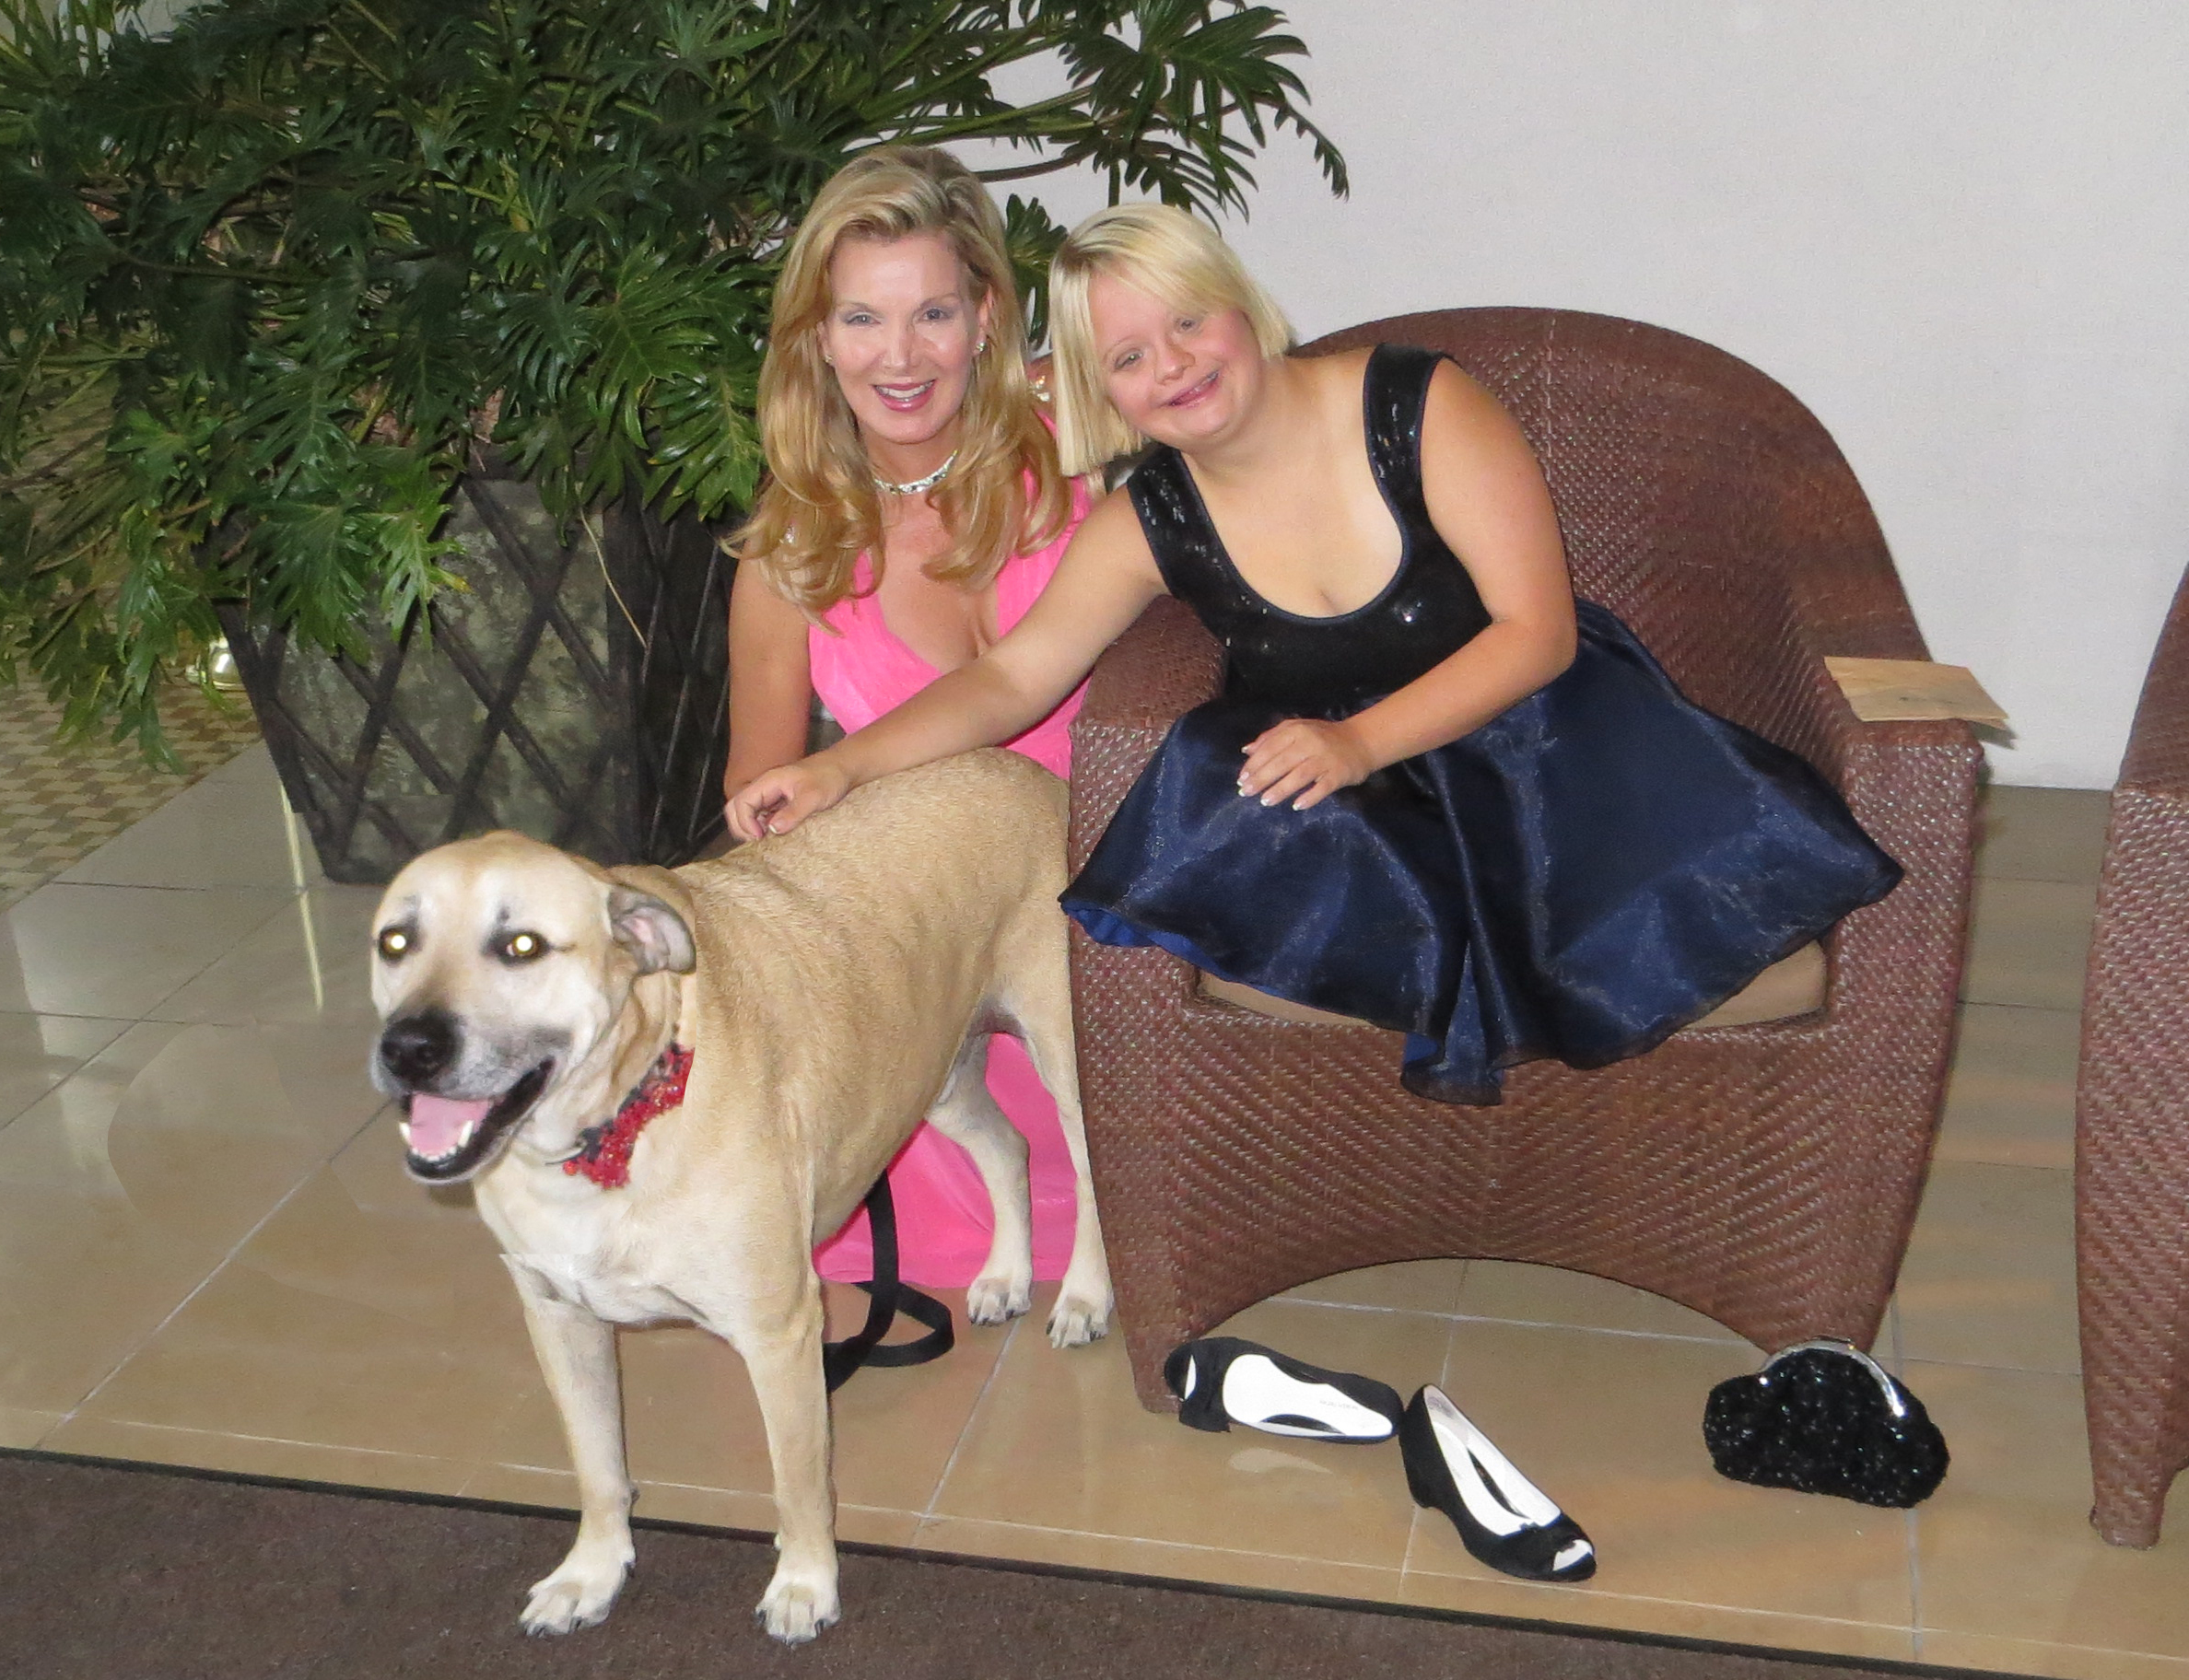 Glee Star, Lauren Potter, at the 2013 Hero Dog Awards shining the light on dogs. Super Smiley was shining his smile! with Megan Blake